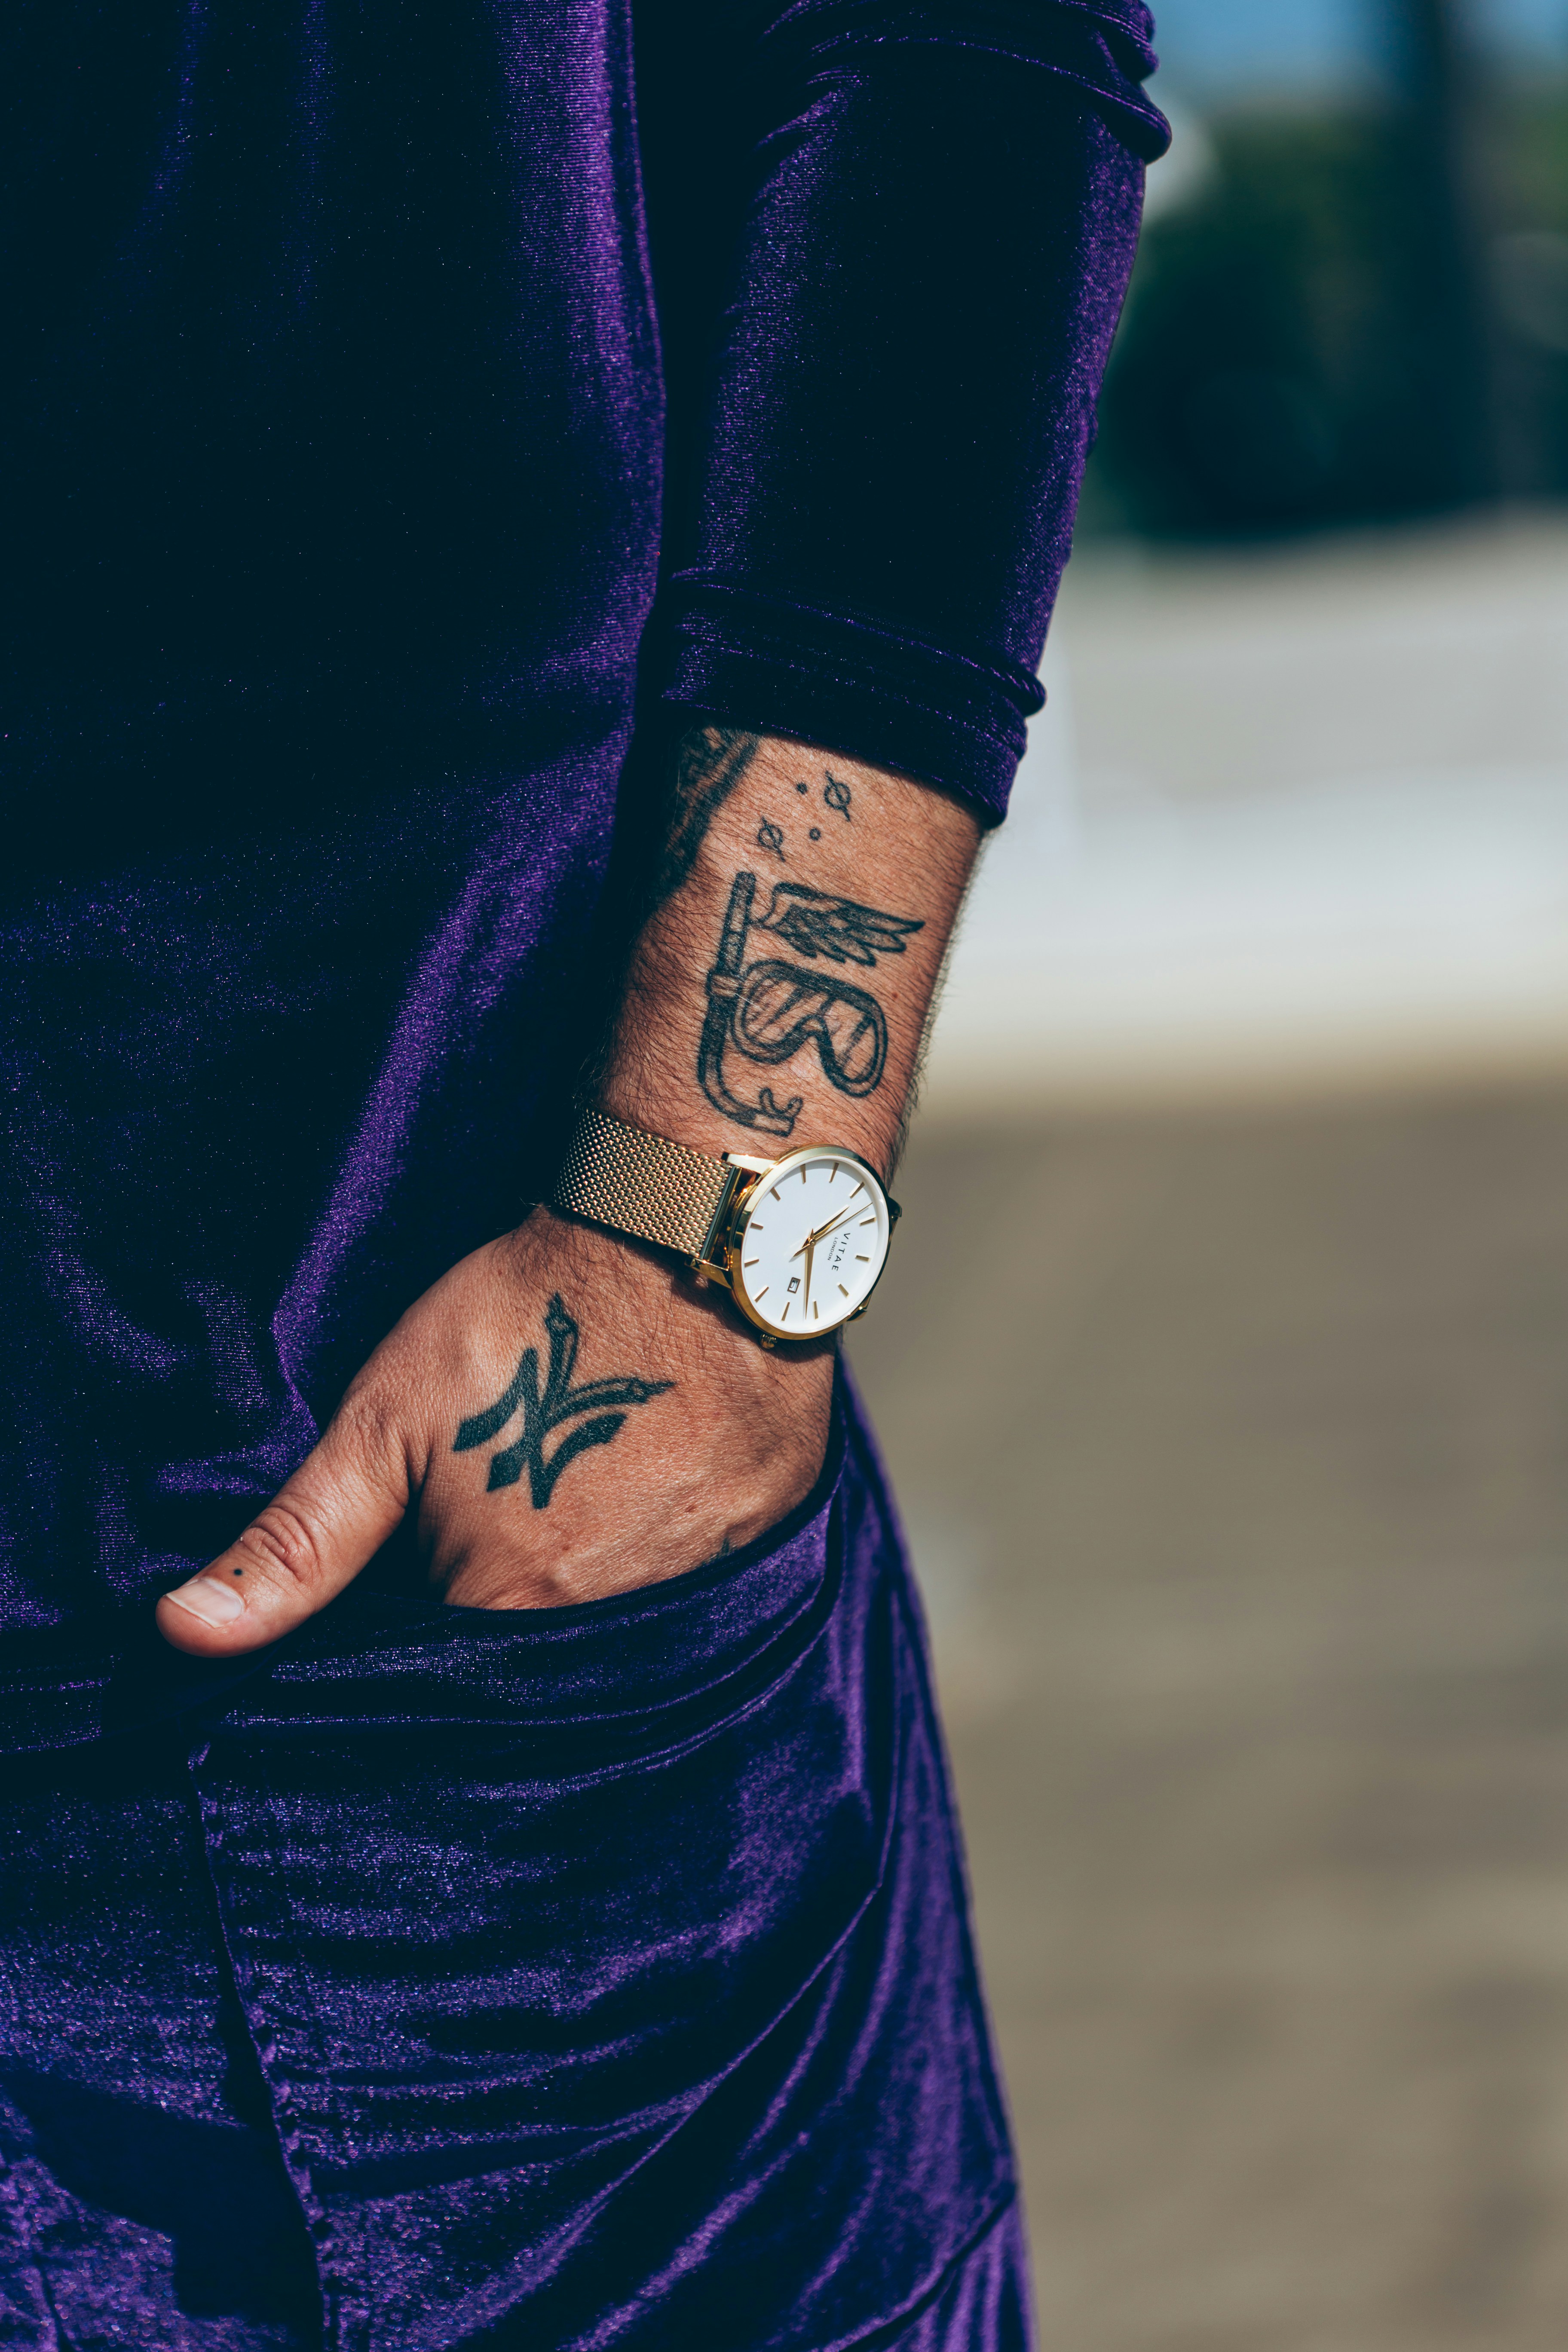 Choose from a curated selection of tattoo photos. Always free on Unsplash.